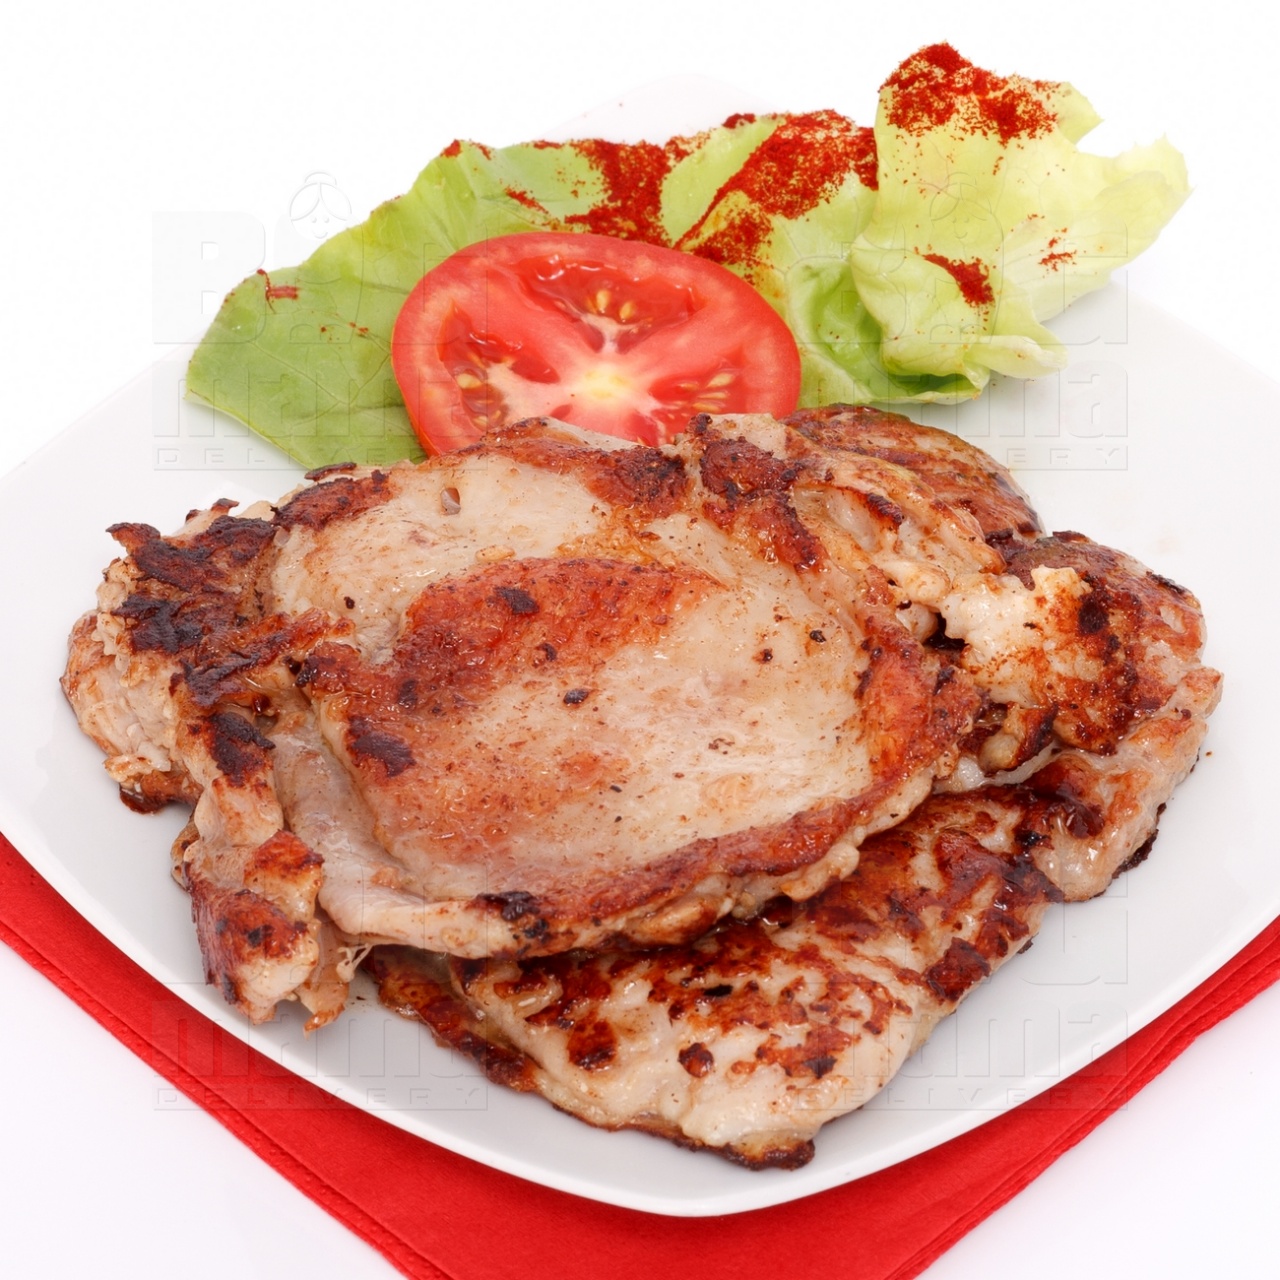 Product #9 image - Barbecued chicken legs